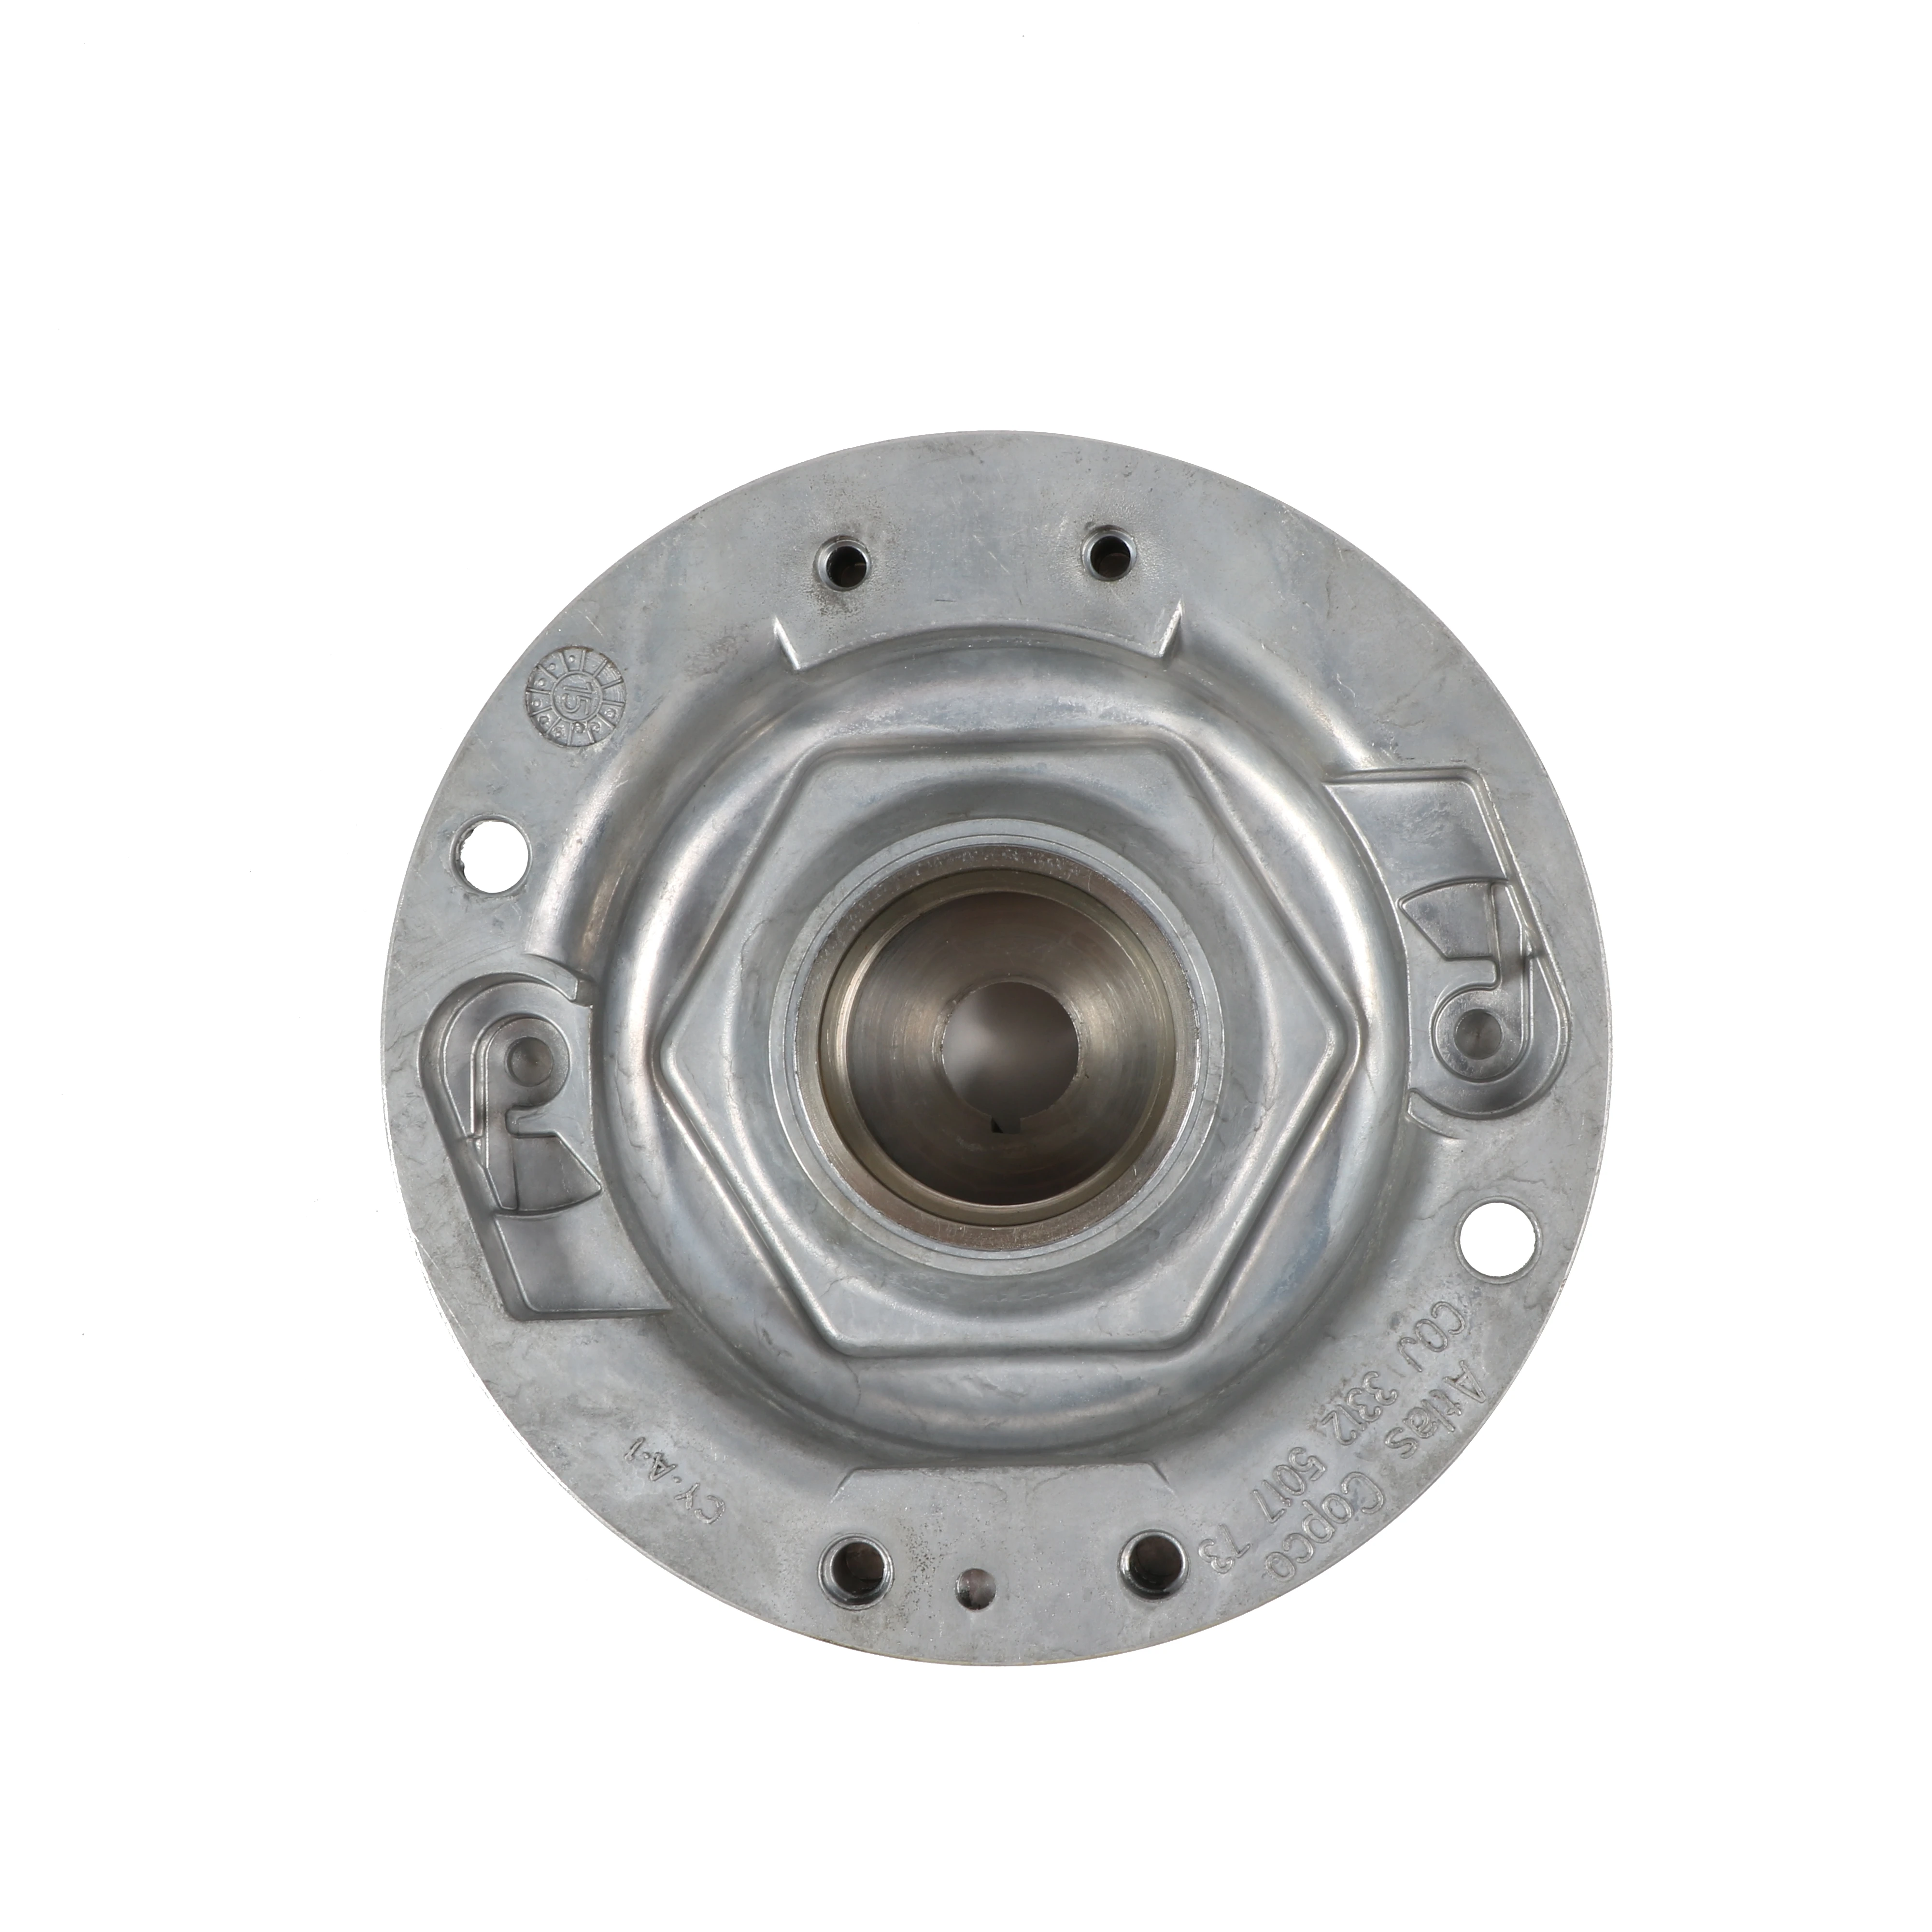 China made high precise motorcycle assembly products ADC12 aluminum alloy die casting body